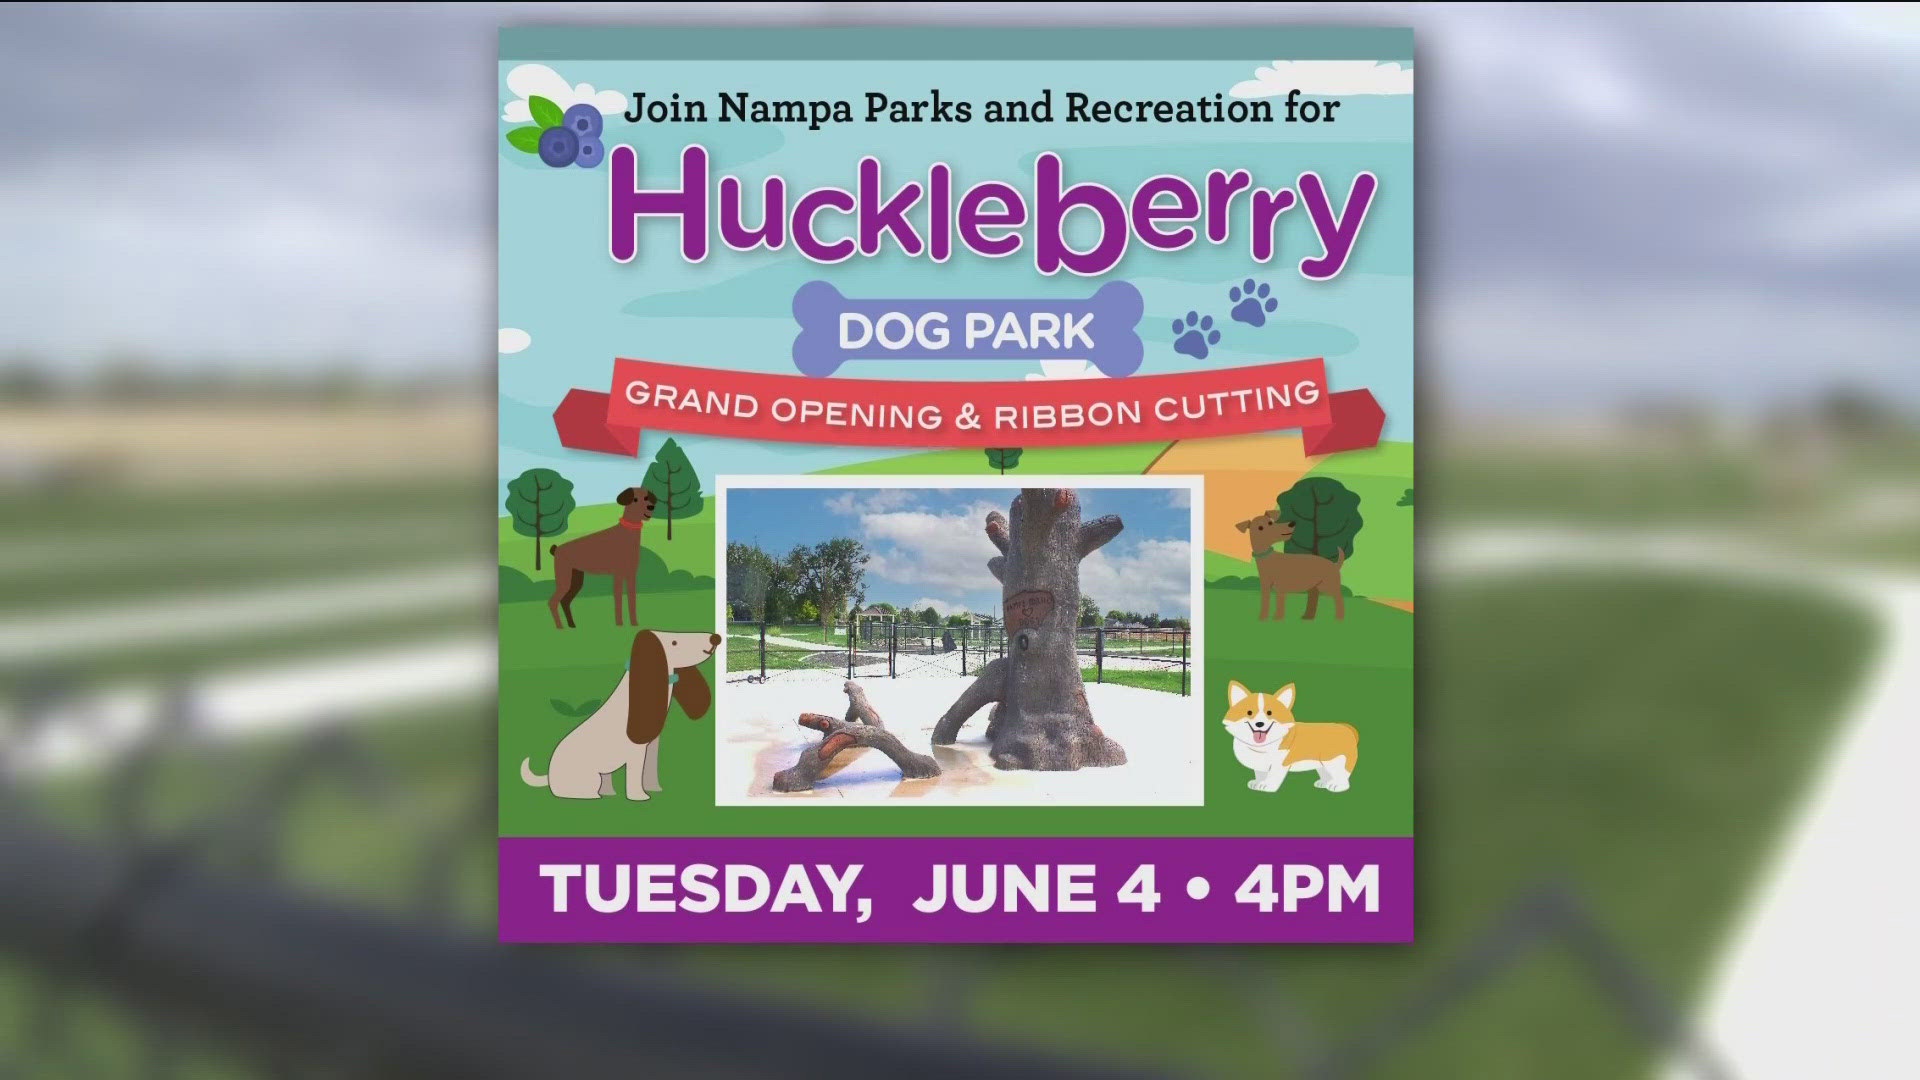 The city of Nampa will anticipates opening the Huckleberry Dog Park on June 4. The nine-acre and fully fenced dog park is located at 11370 Smith Ave.